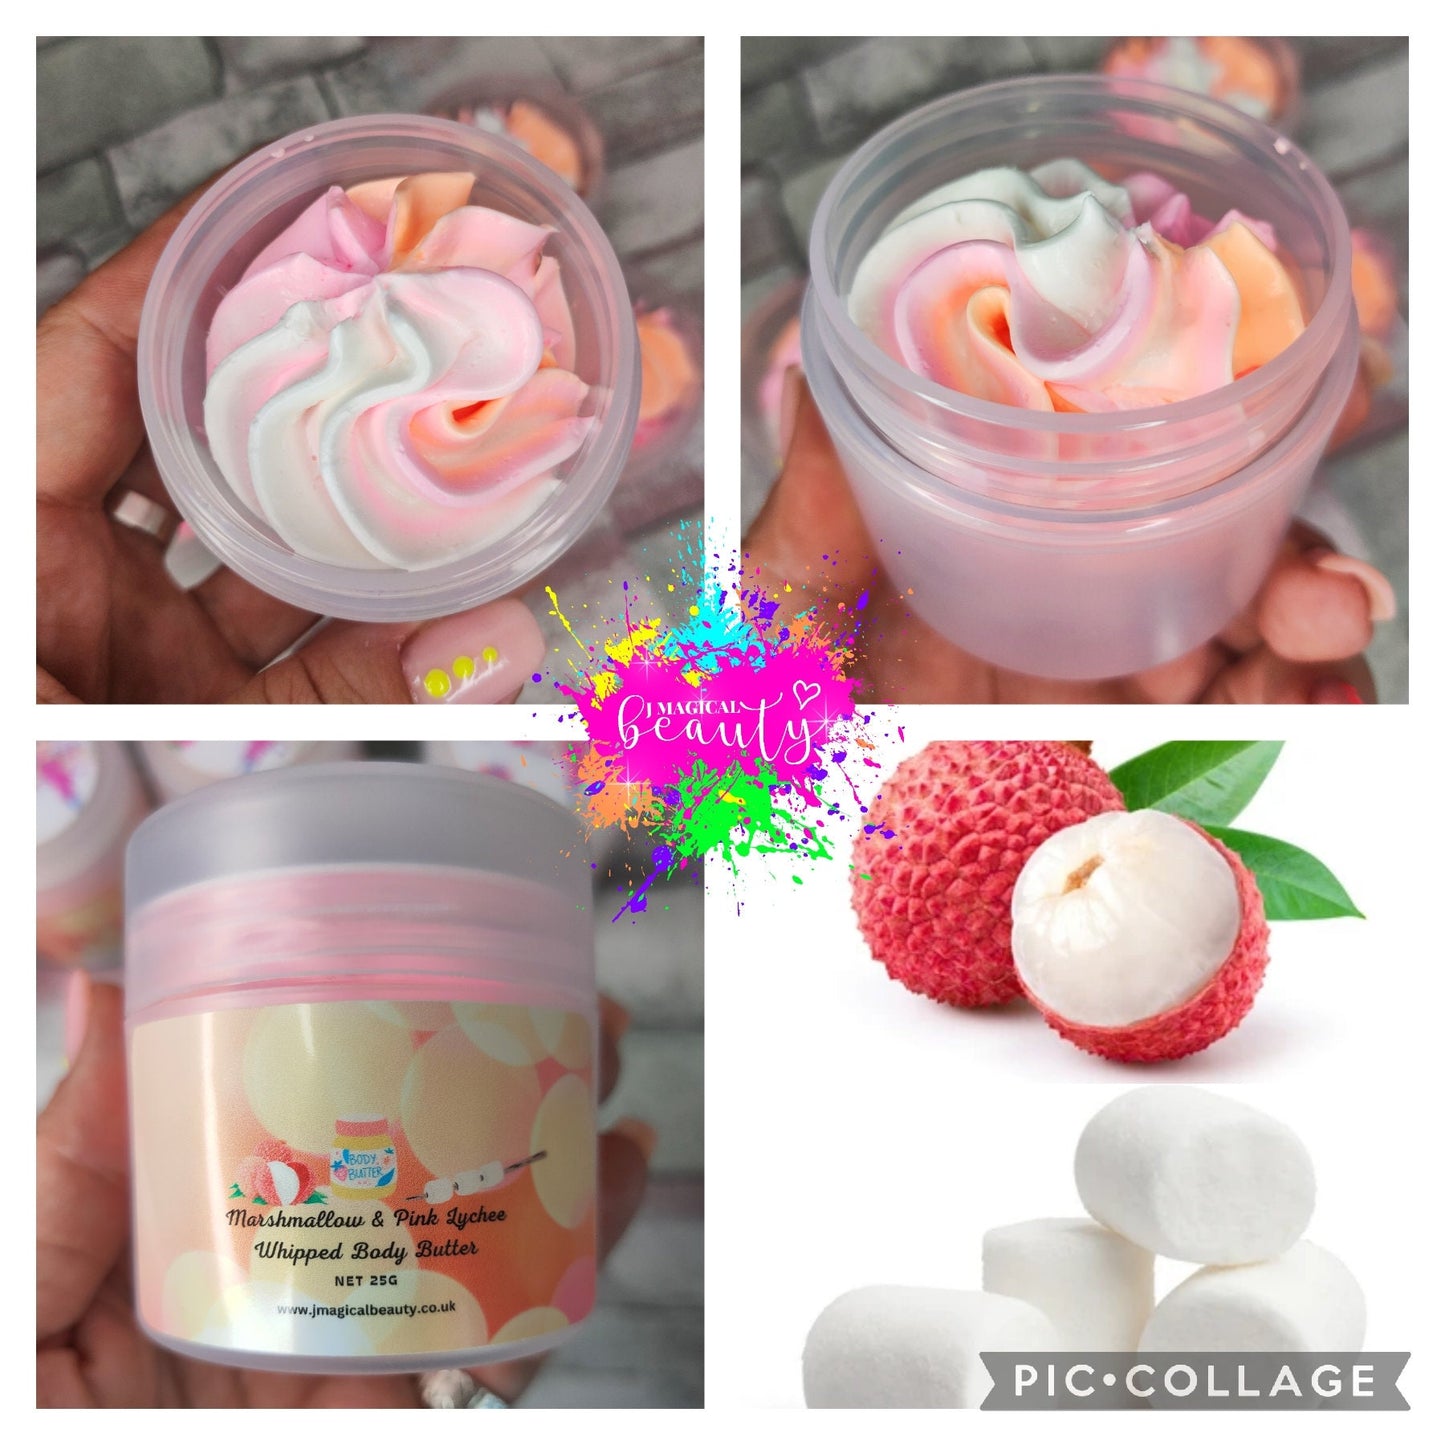 Whipped Body Butter/Marshmallow & Pink Lychee scent, 25G NET